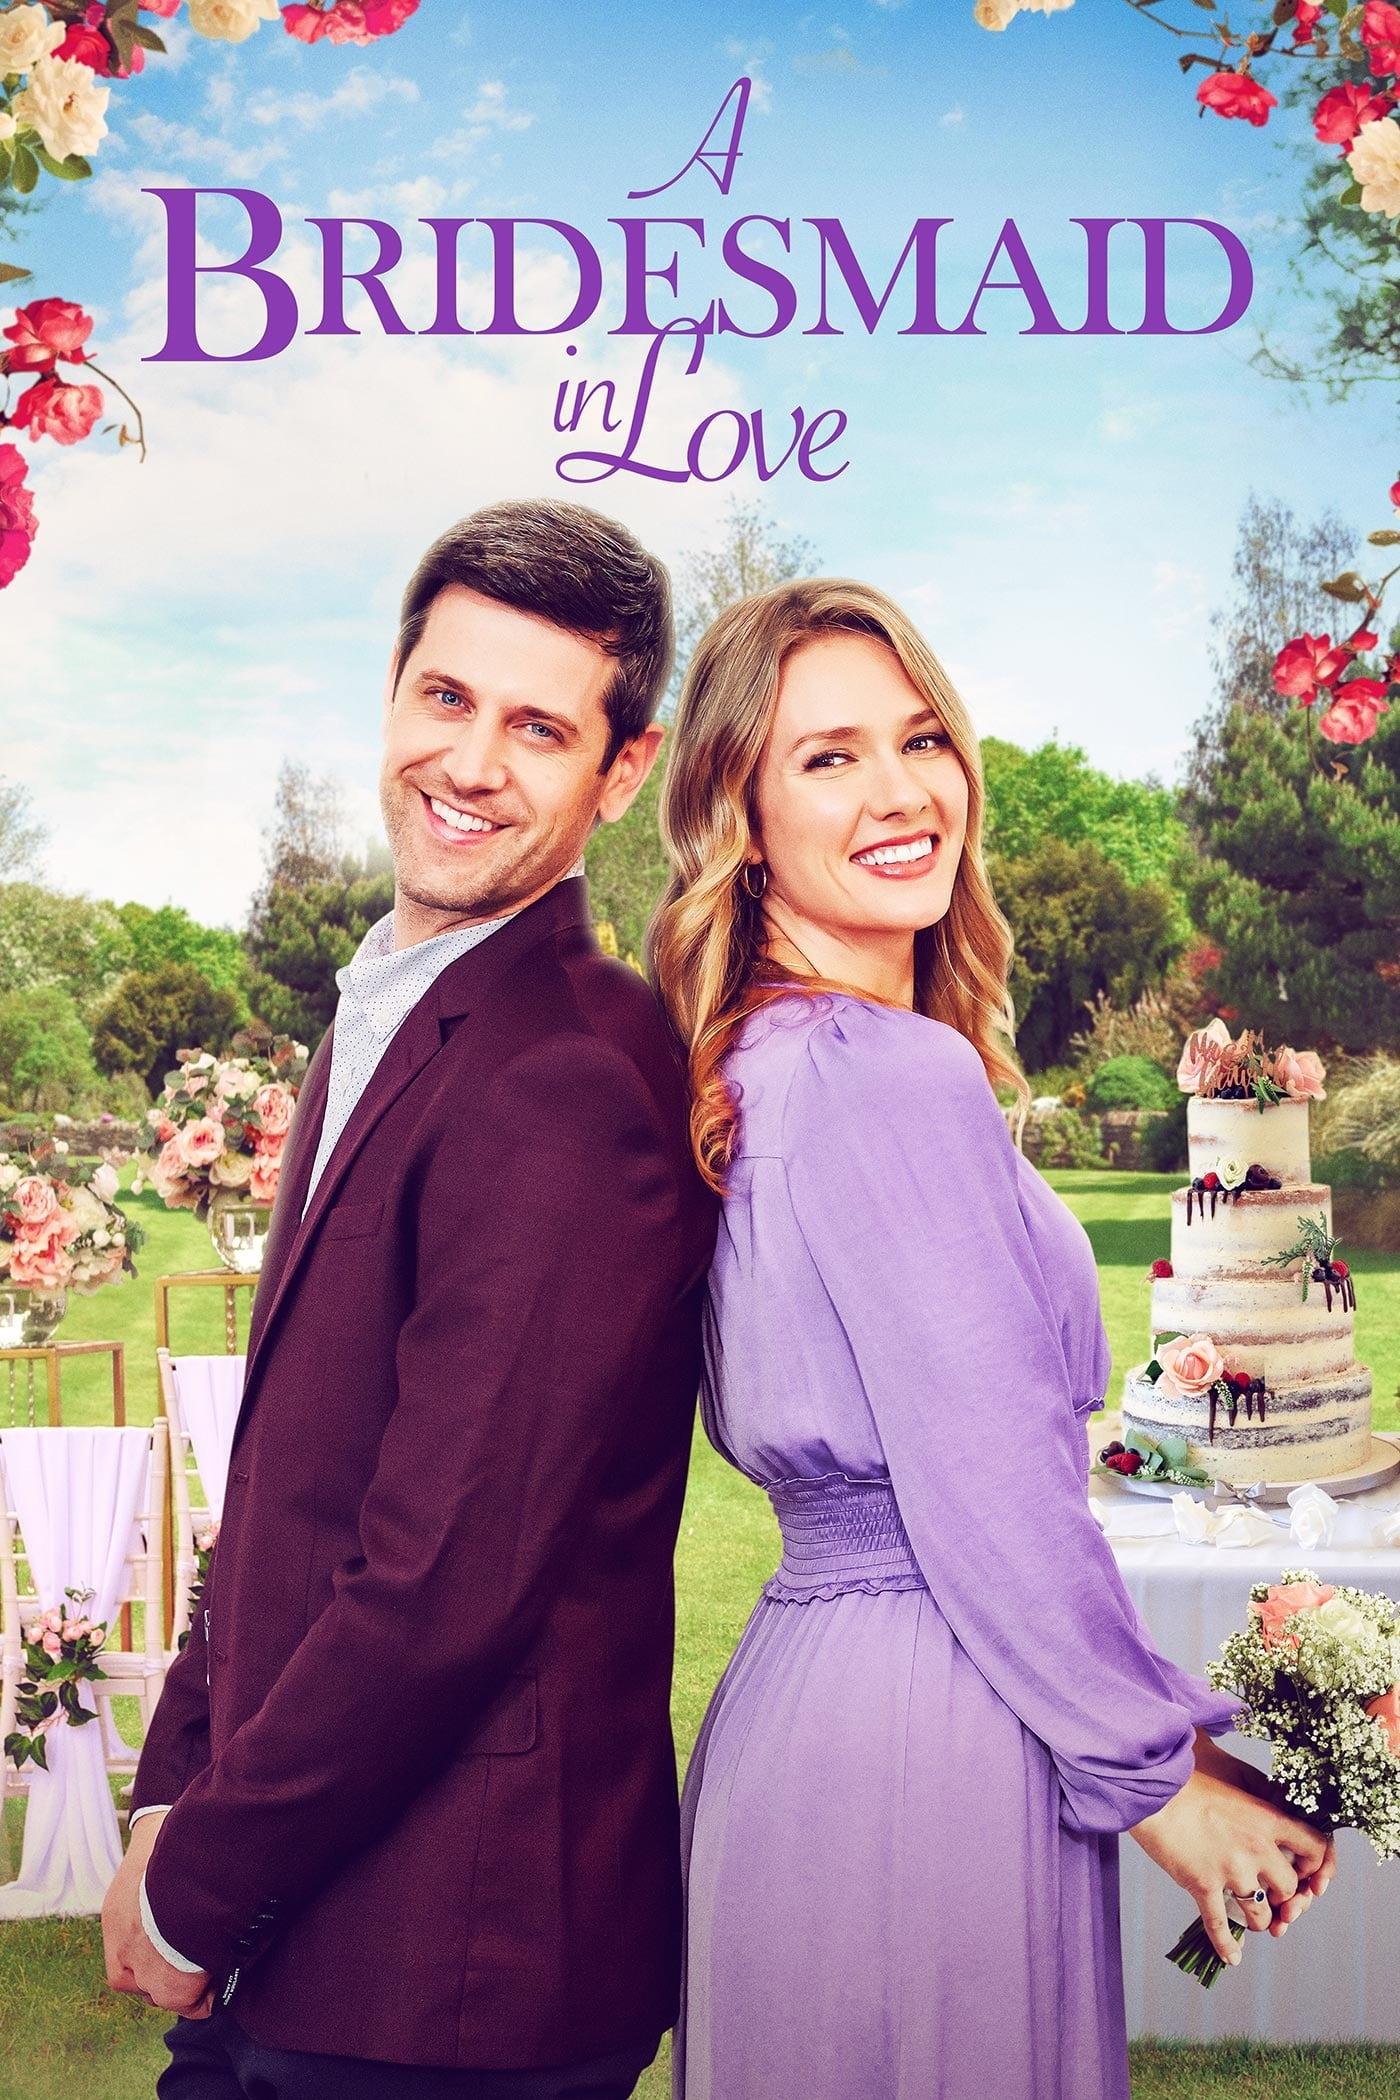 A Bridesmaid in Love poster